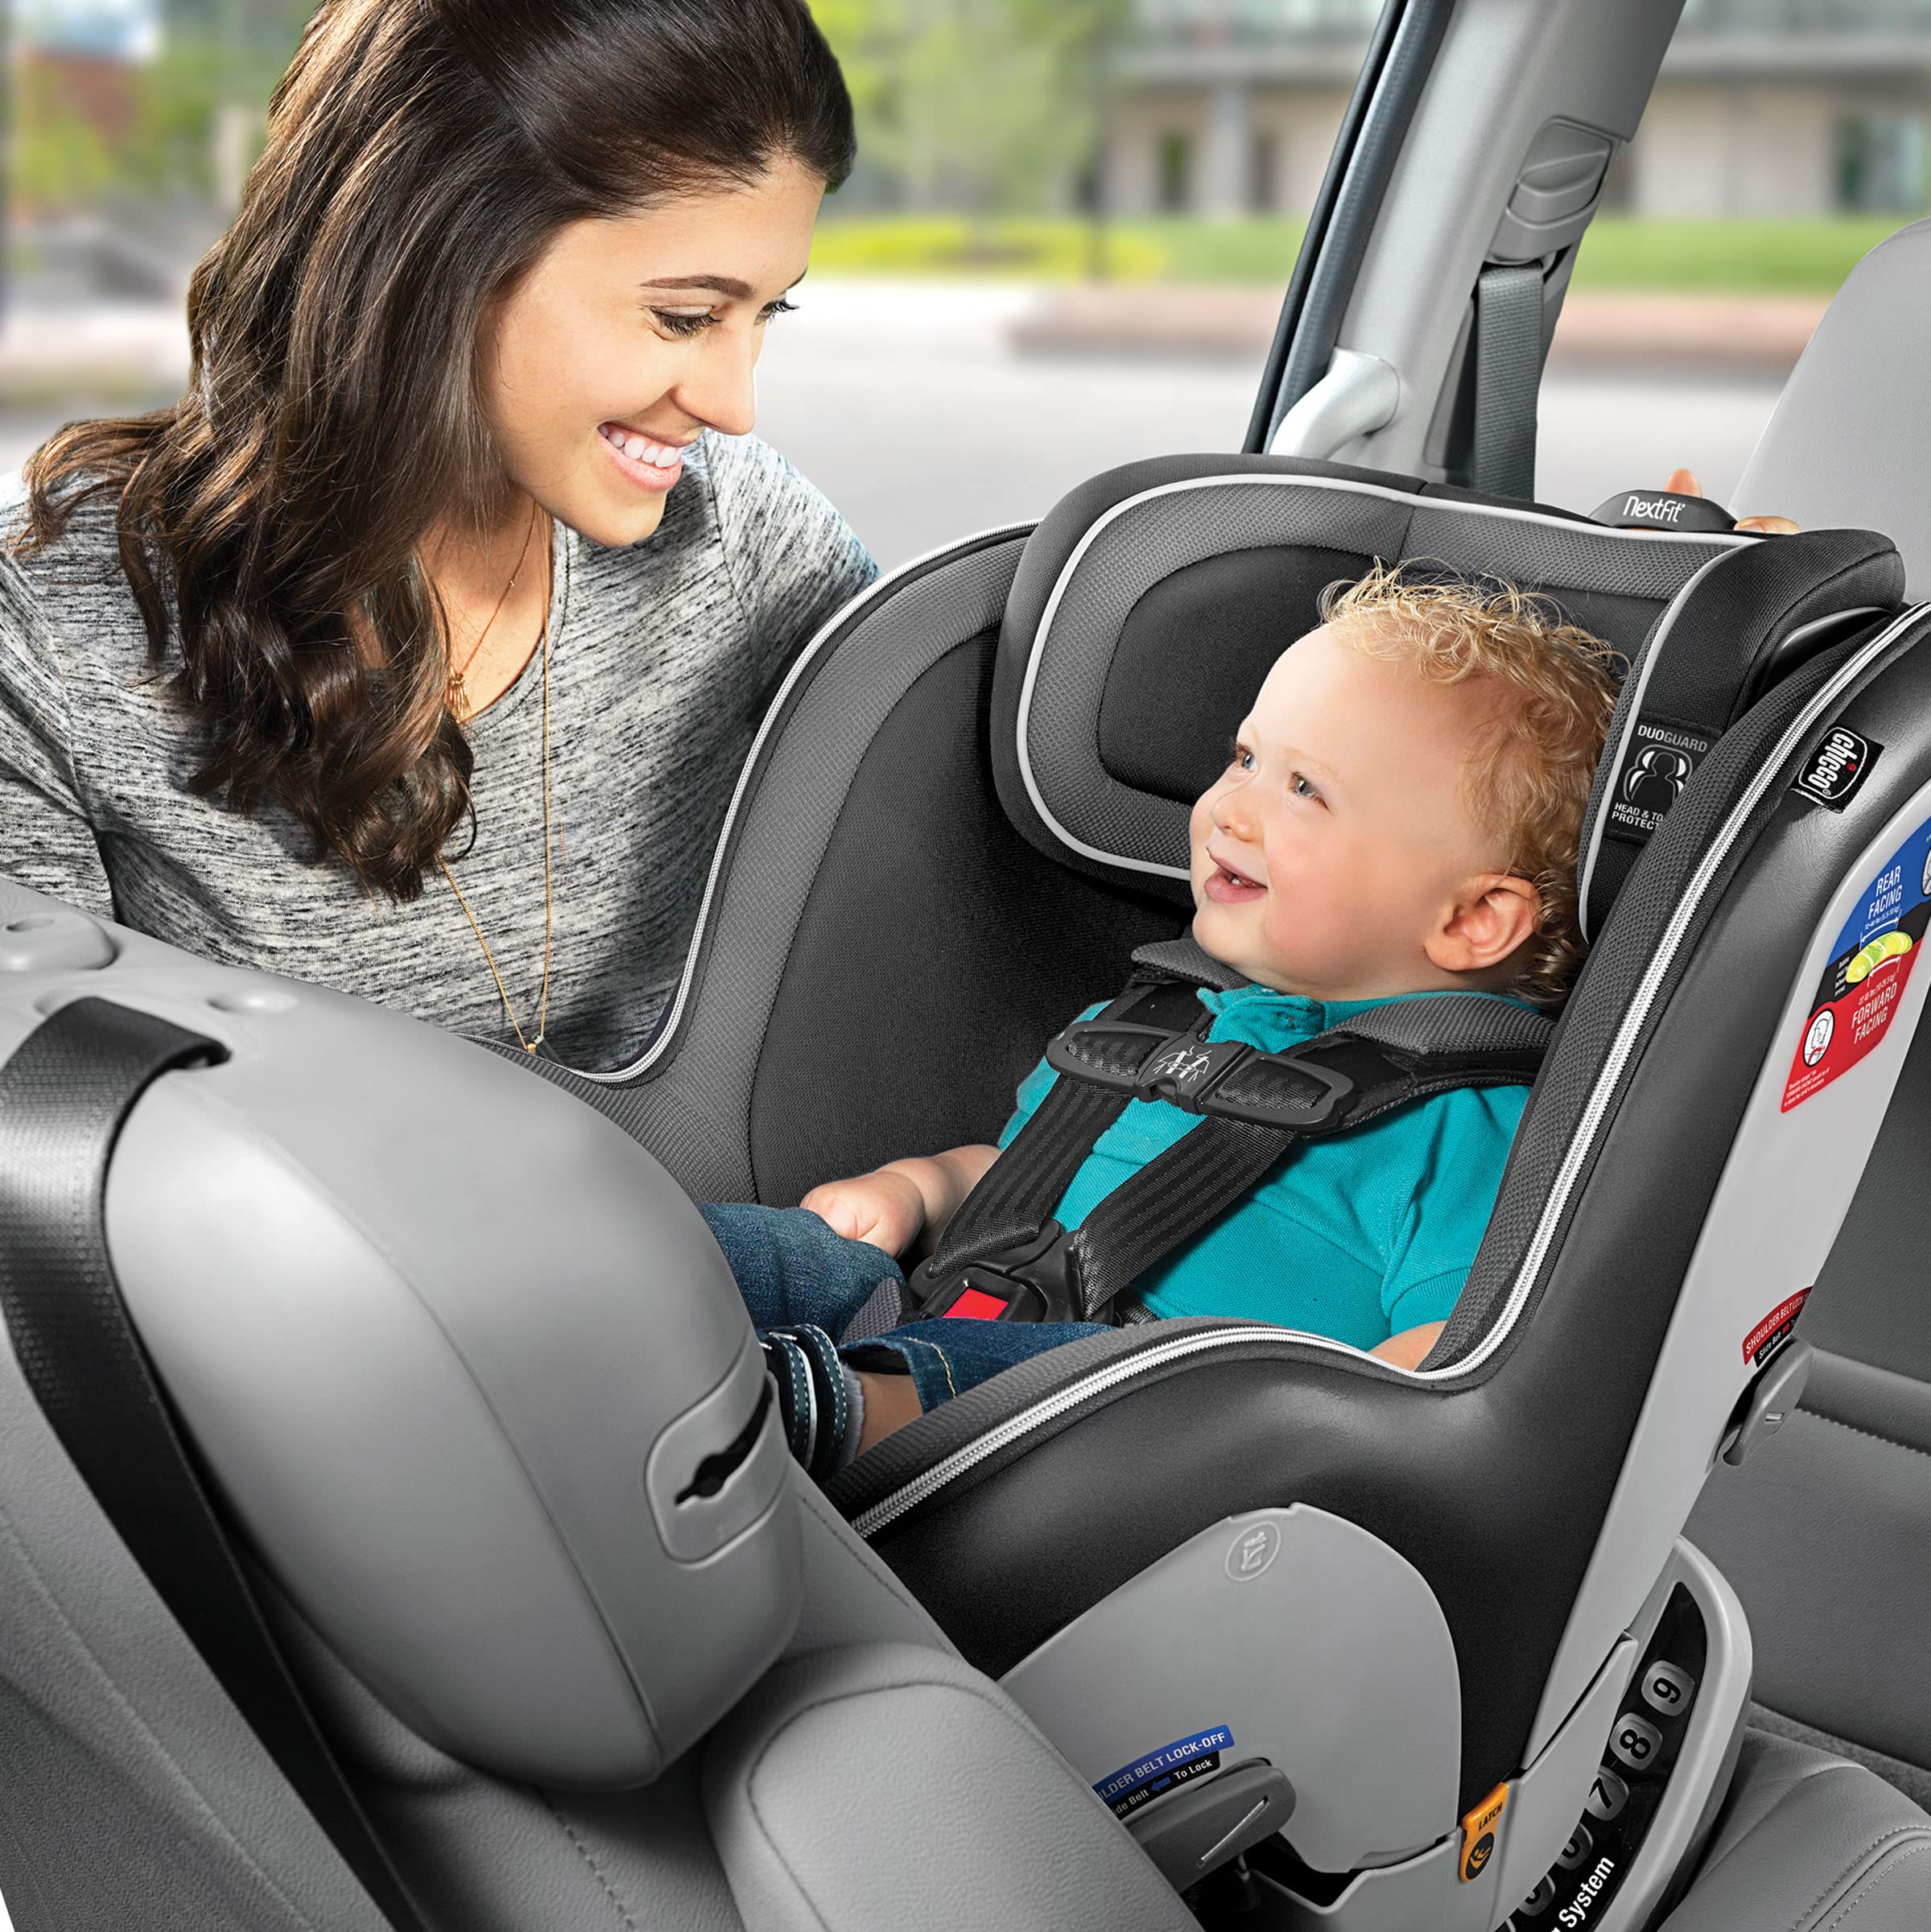 Chicco NextFit Zip Convertible Car Seat | Rear-Facing Seat for Infants 12-40 lbs. | Forward-Facing Toddler Car Seat 25-65 lbs. | Baby Travel Gear | Carbon